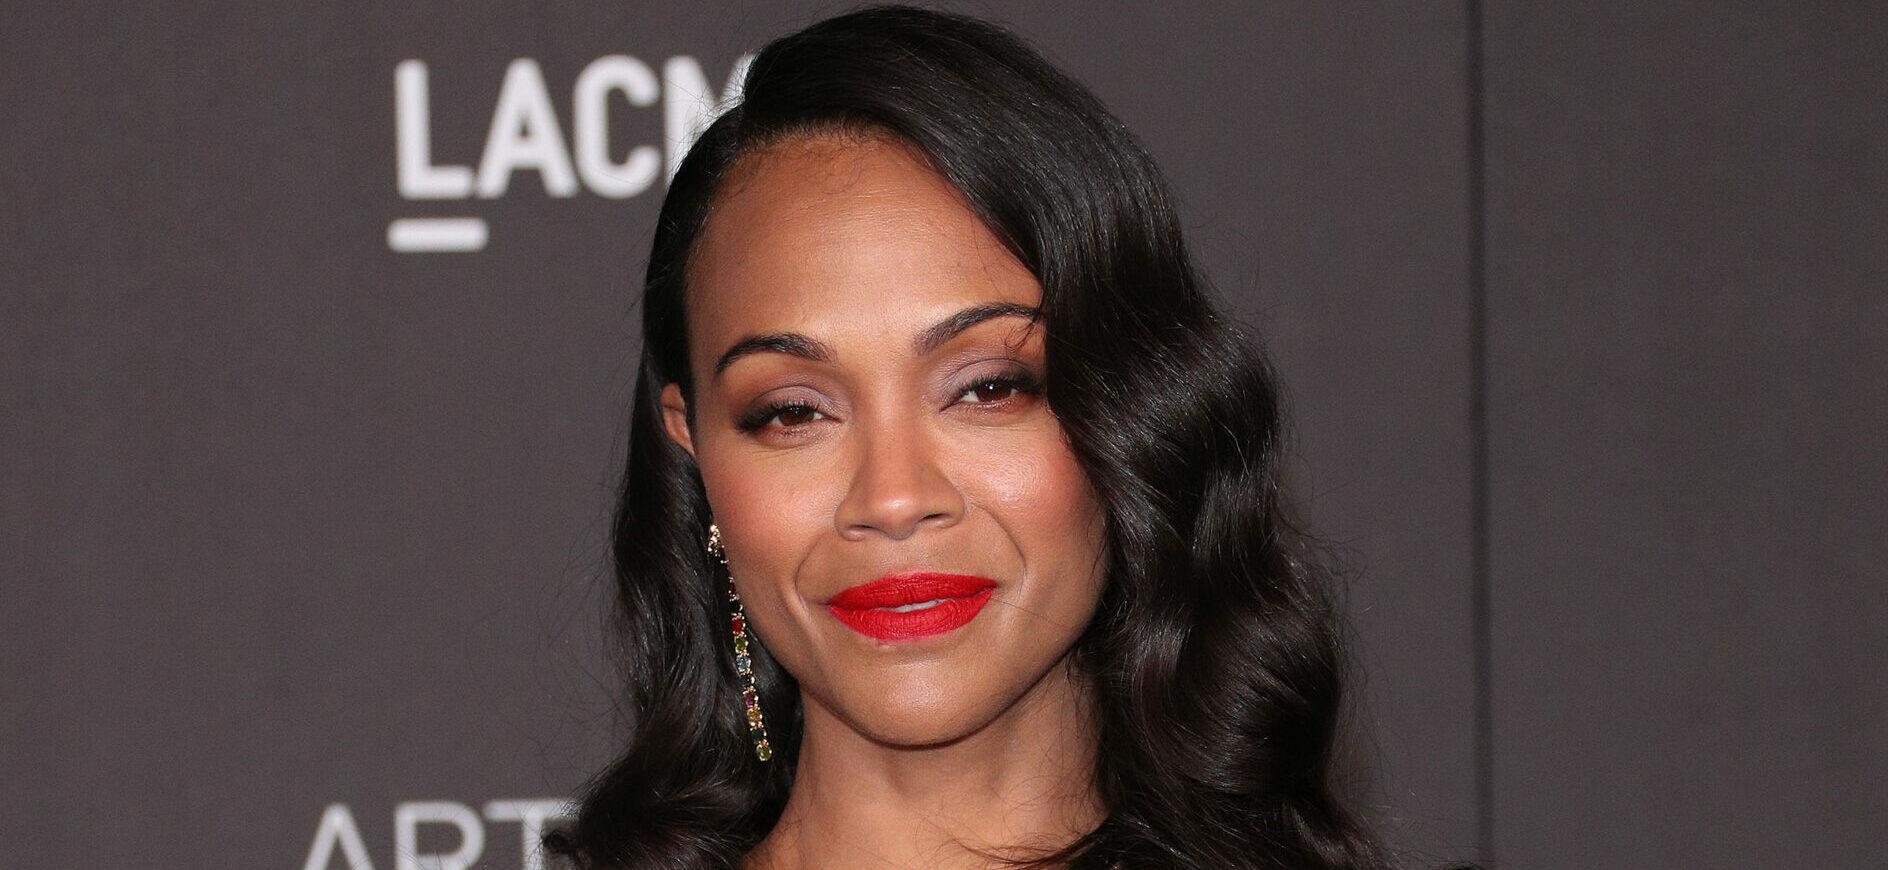 From Scratch's Zoe Saldana: Inside star's childhood and father's